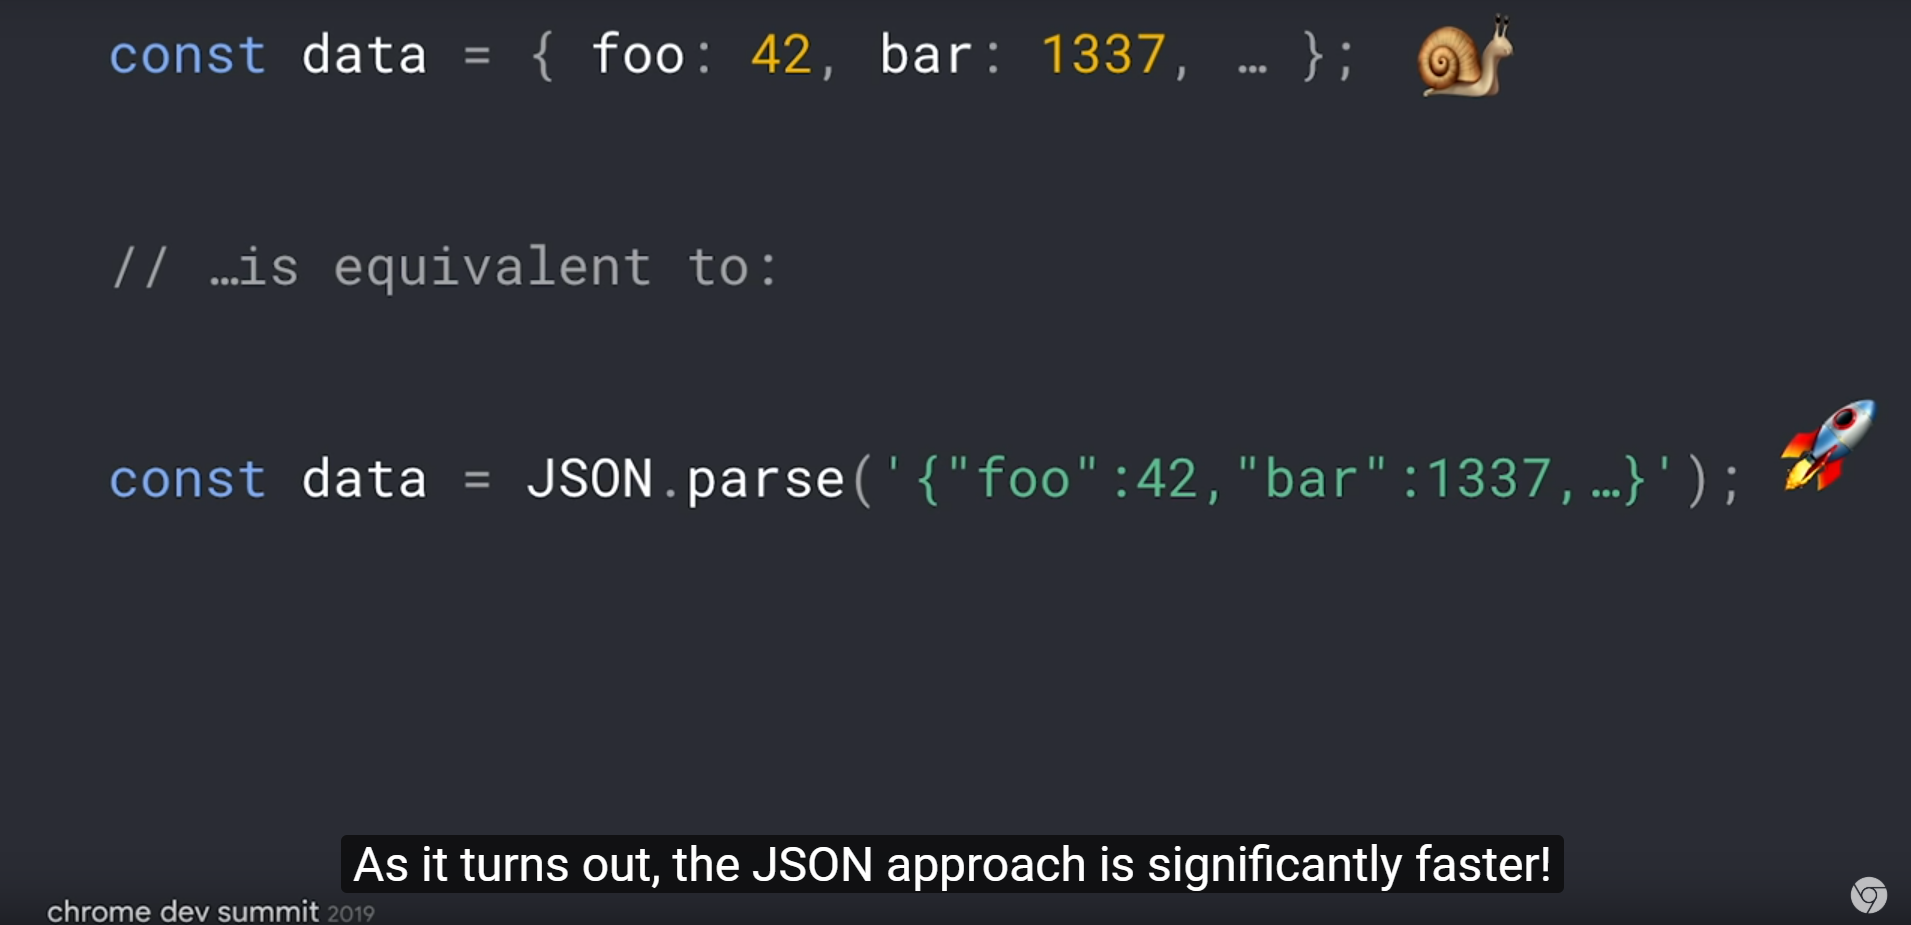 /images/json-parse-is-faster-than-object-literal/4c9cb490-207e-41db-9d59-126135a099ca.png